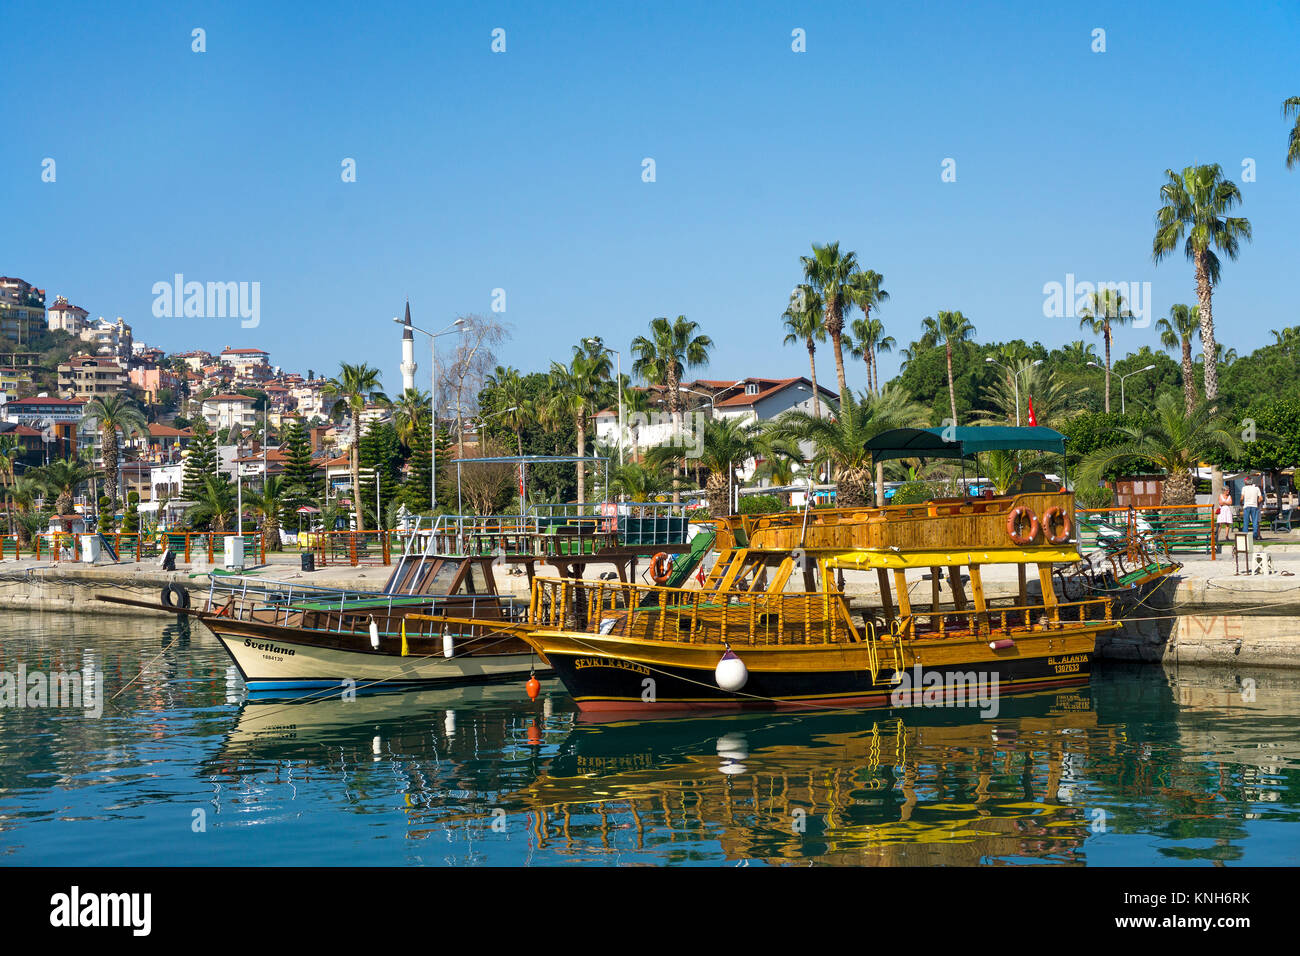 Excursion vessels at harbour of Alanya, turkish riviera, Turkey Stock Photo